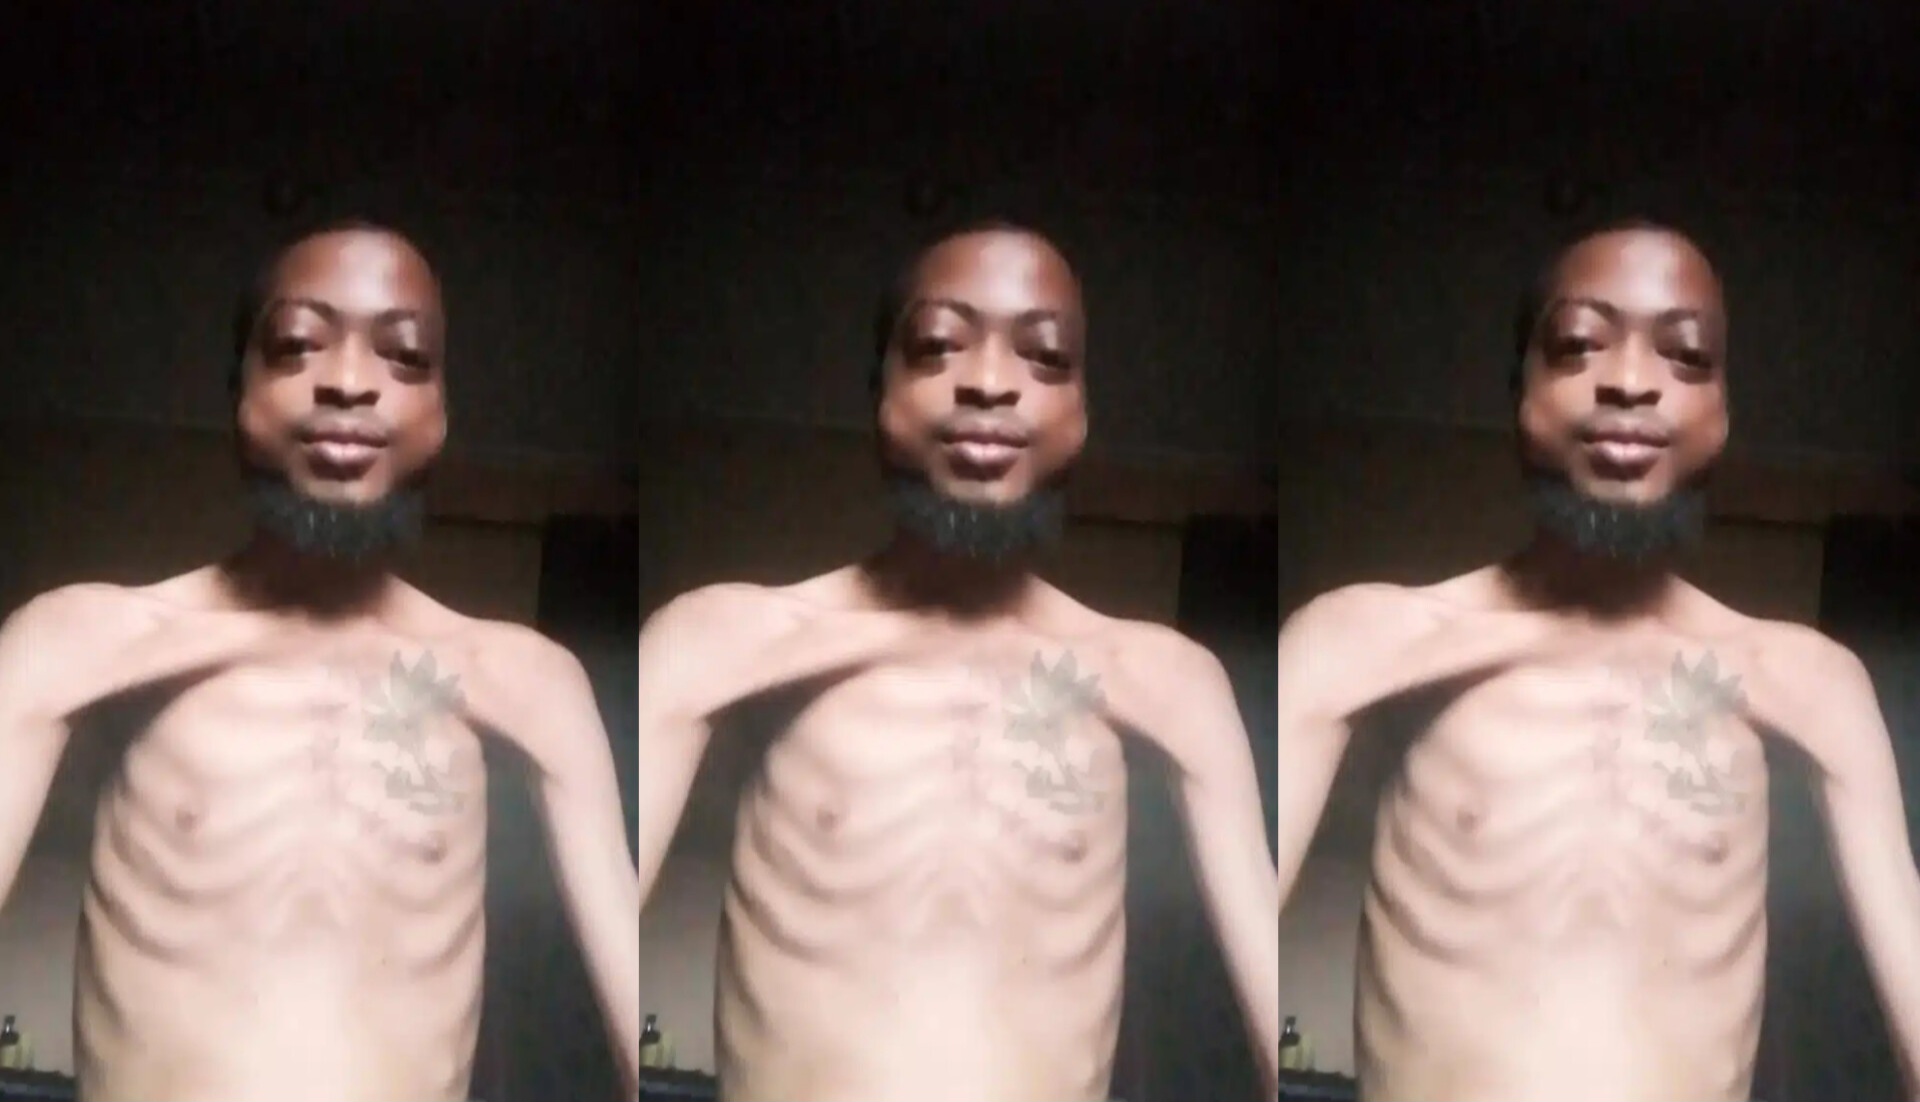 A Nigerian man is crying out for help because hunger is about to kill him."